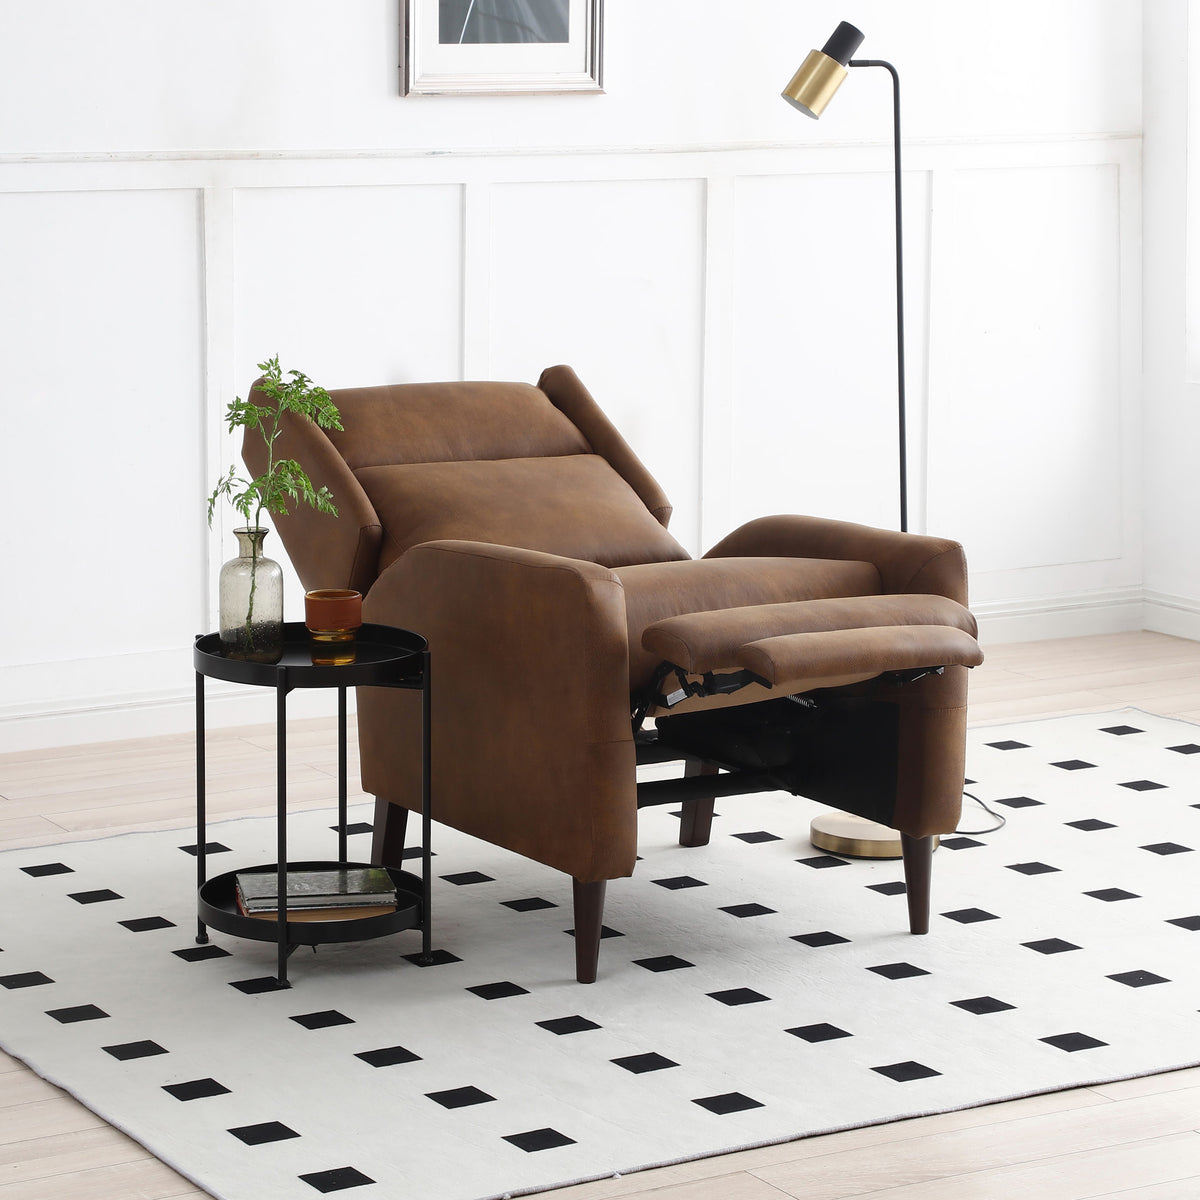 Moreton Brown Faux Leather Reclining Armchair for living room